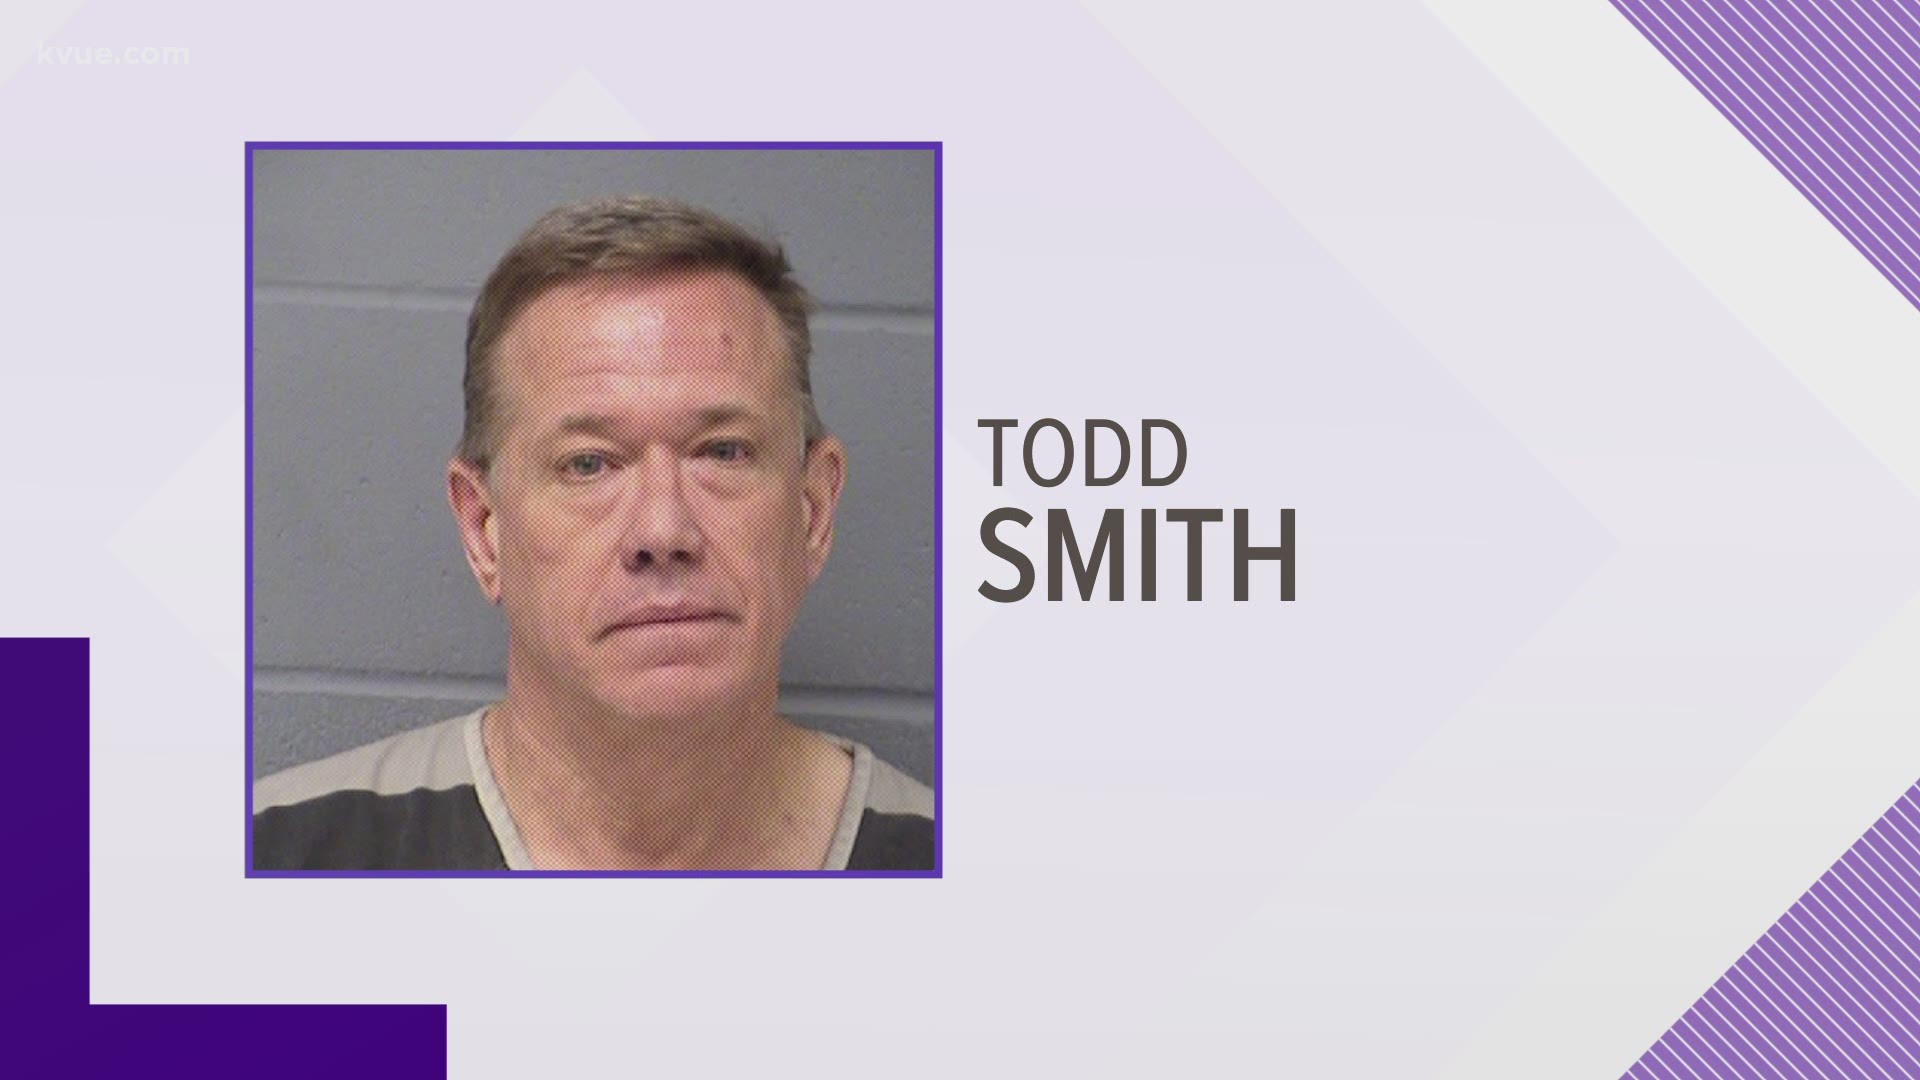 Todd Smith is accused of stealing money from possible investors in the Texas hemp industry.